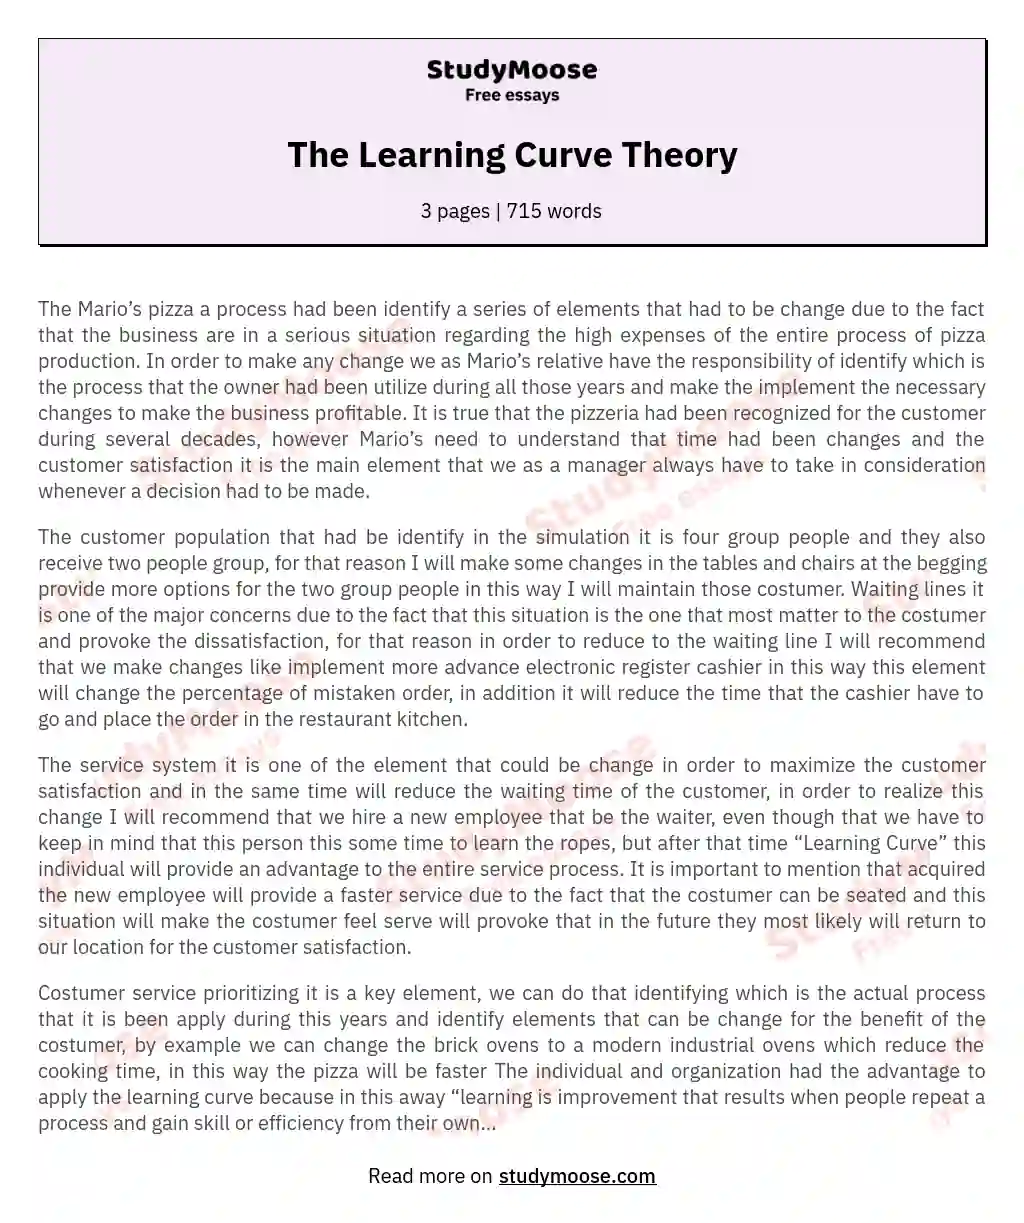 The Learning Curve Theory essay